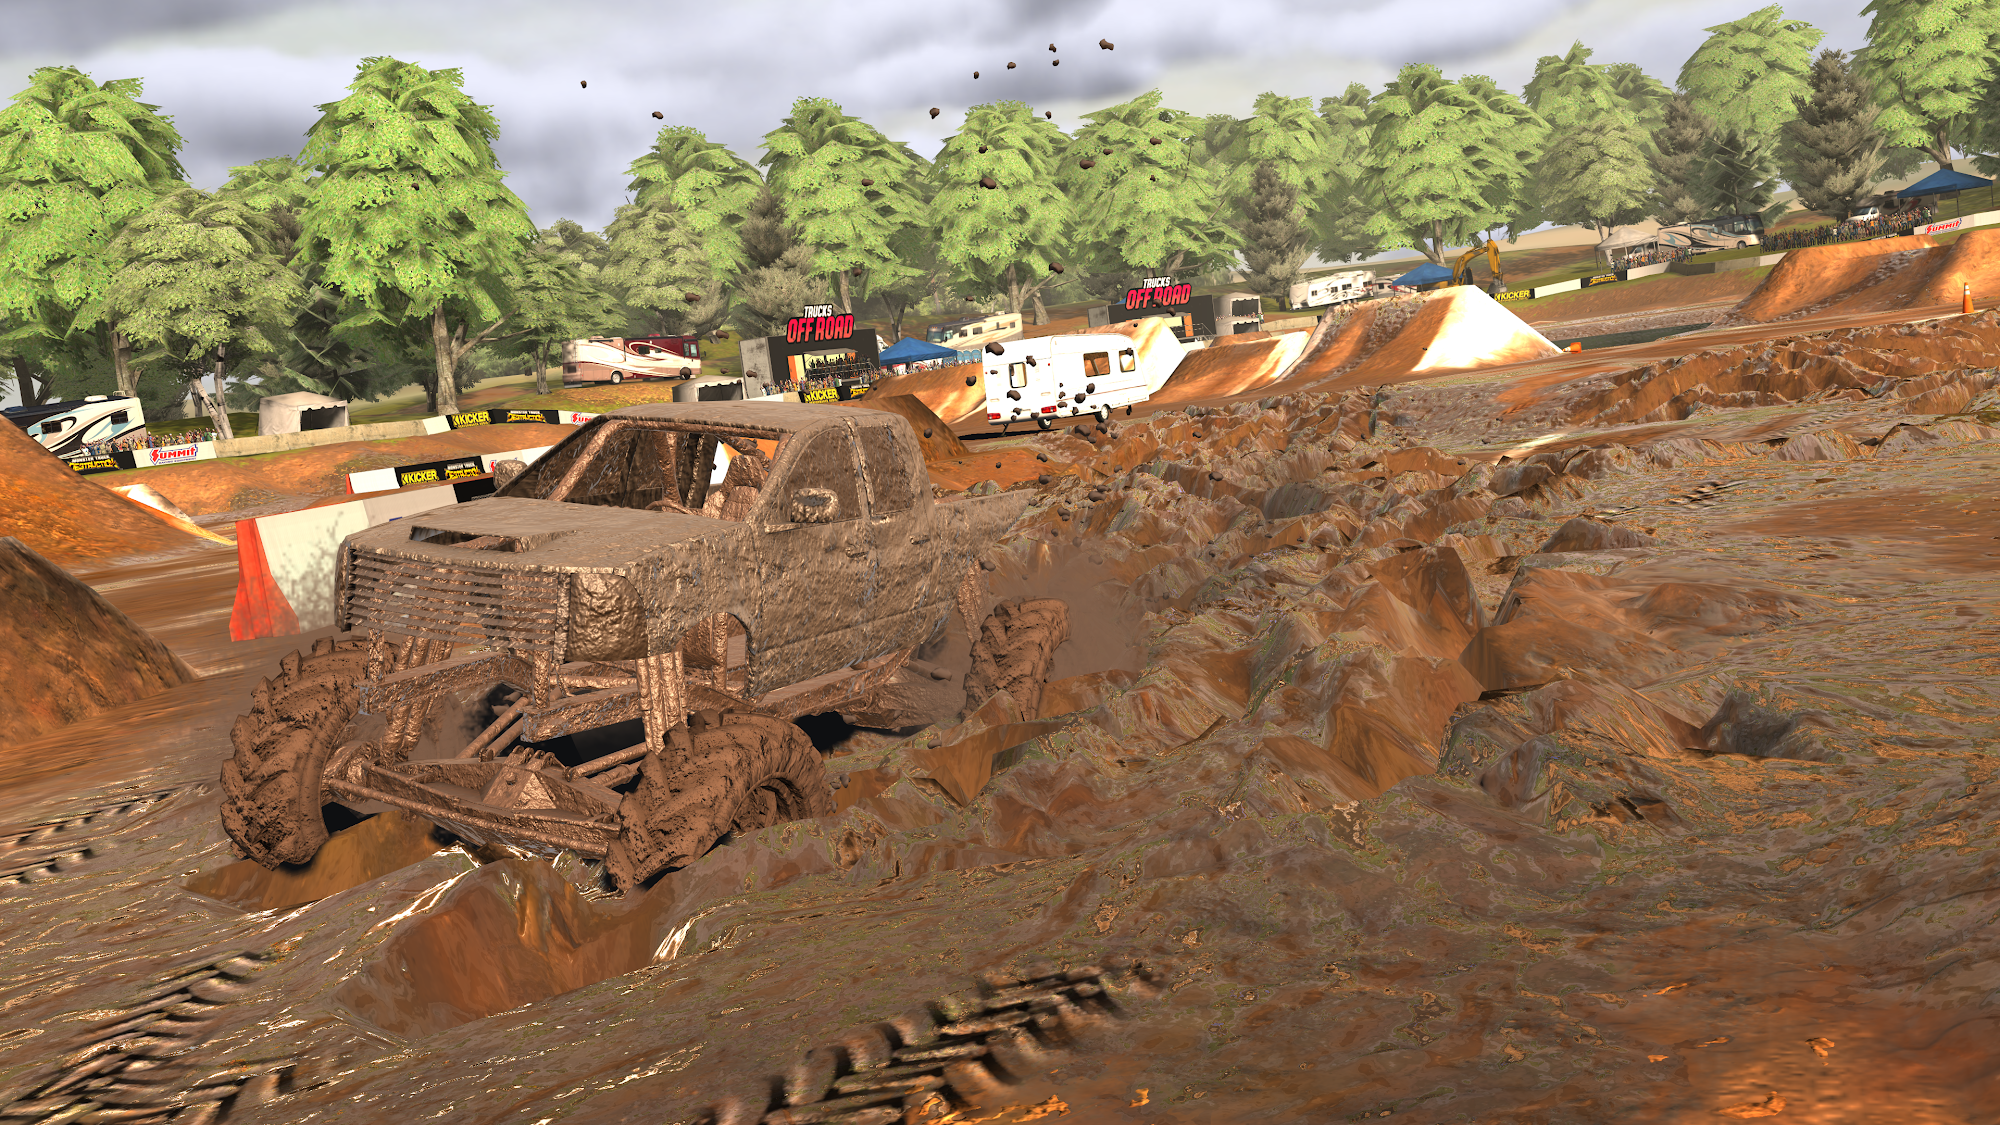 Trucks Off Road for Android